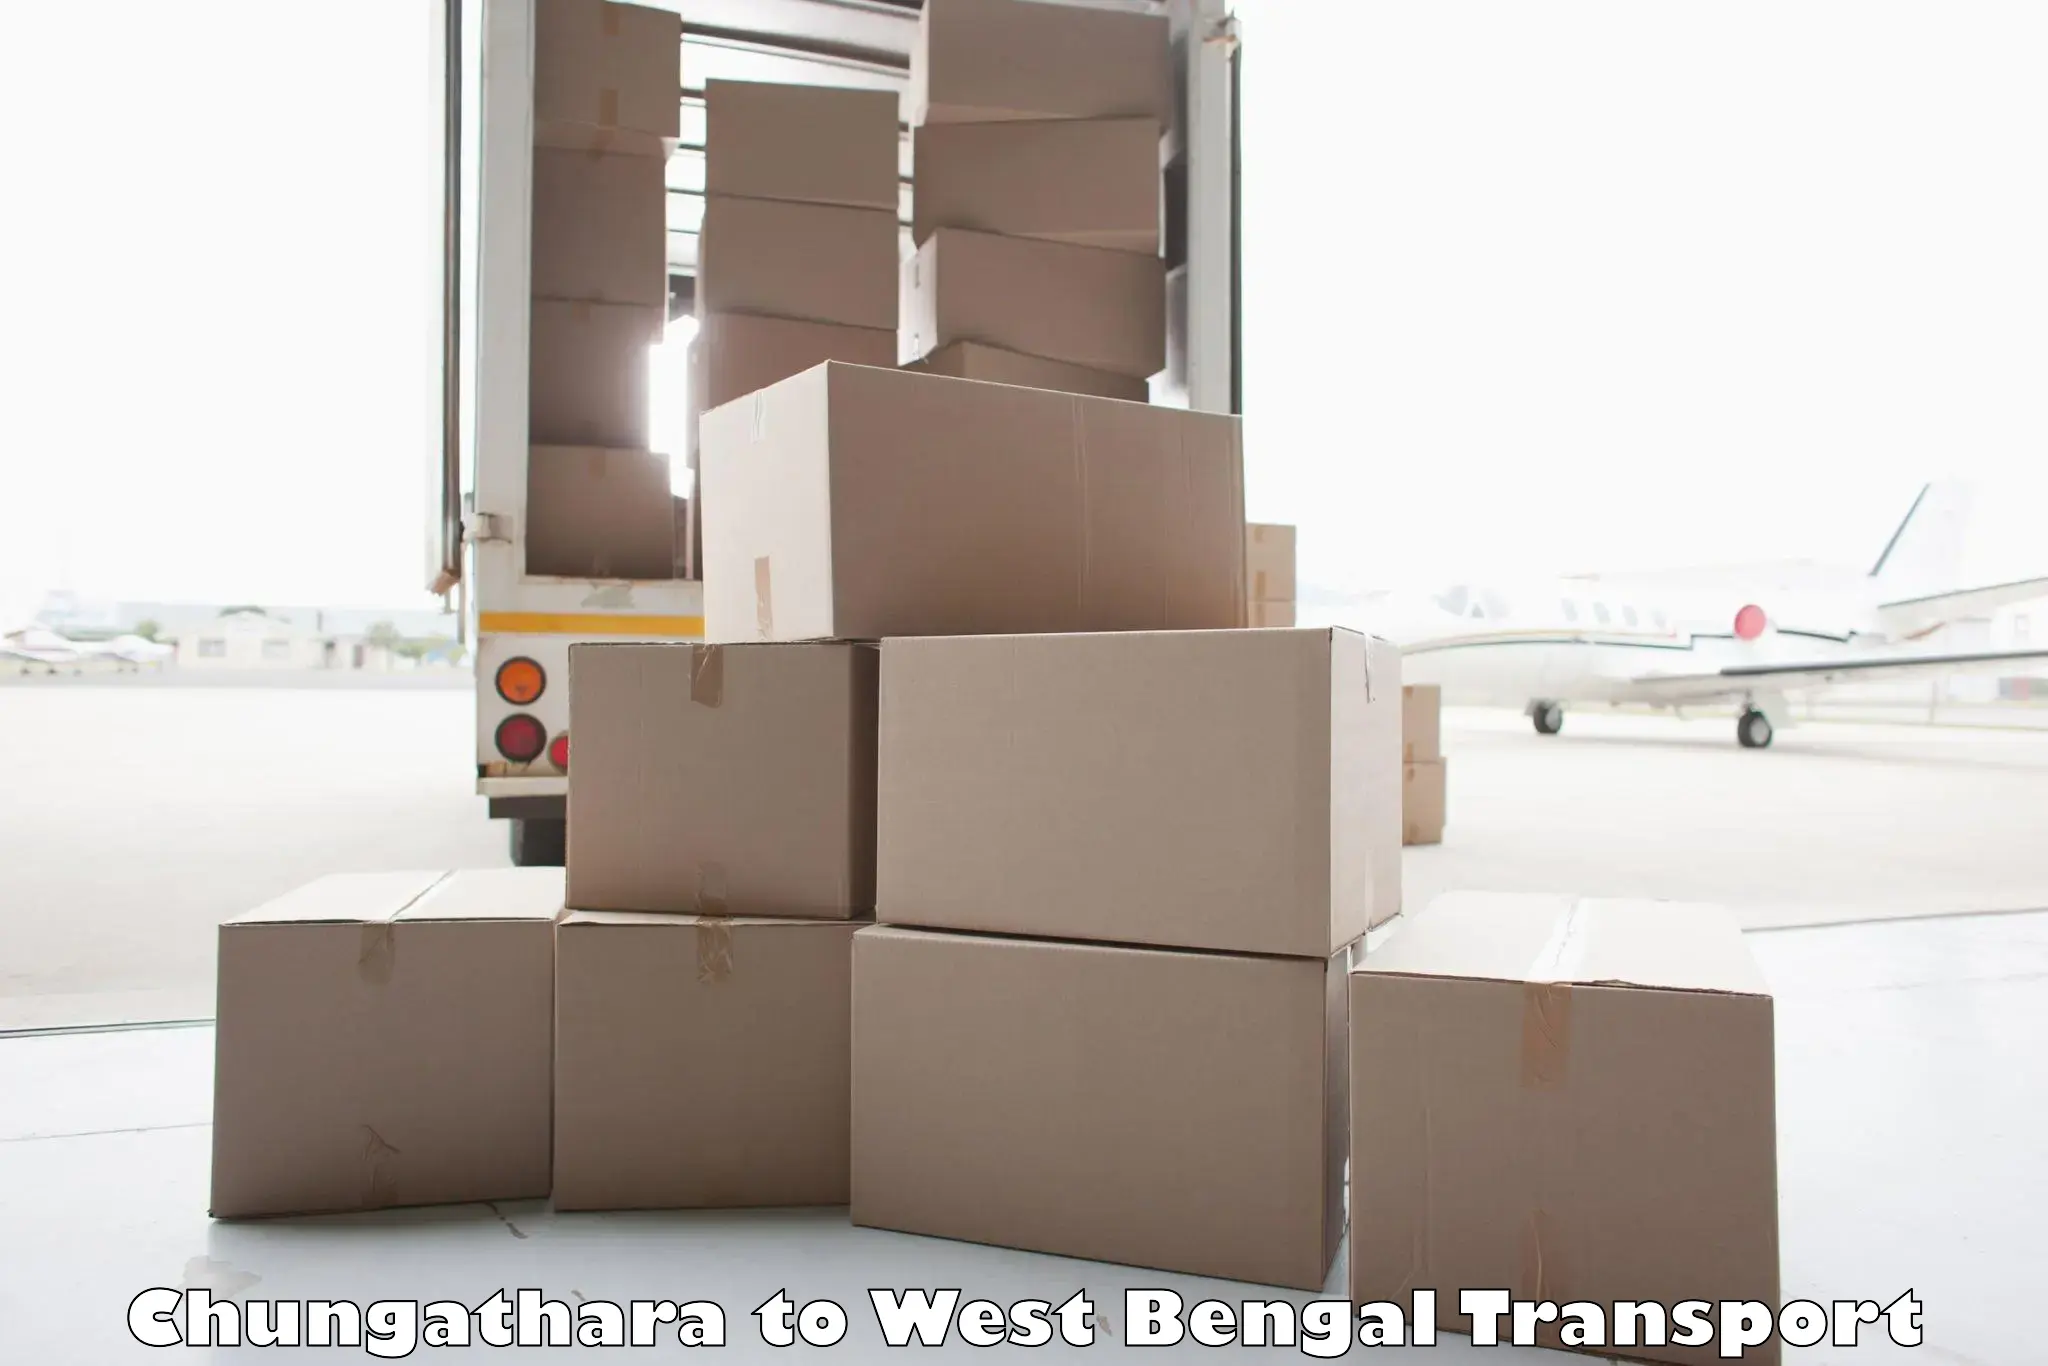 Best transport services in India Chungathara to Bagnan